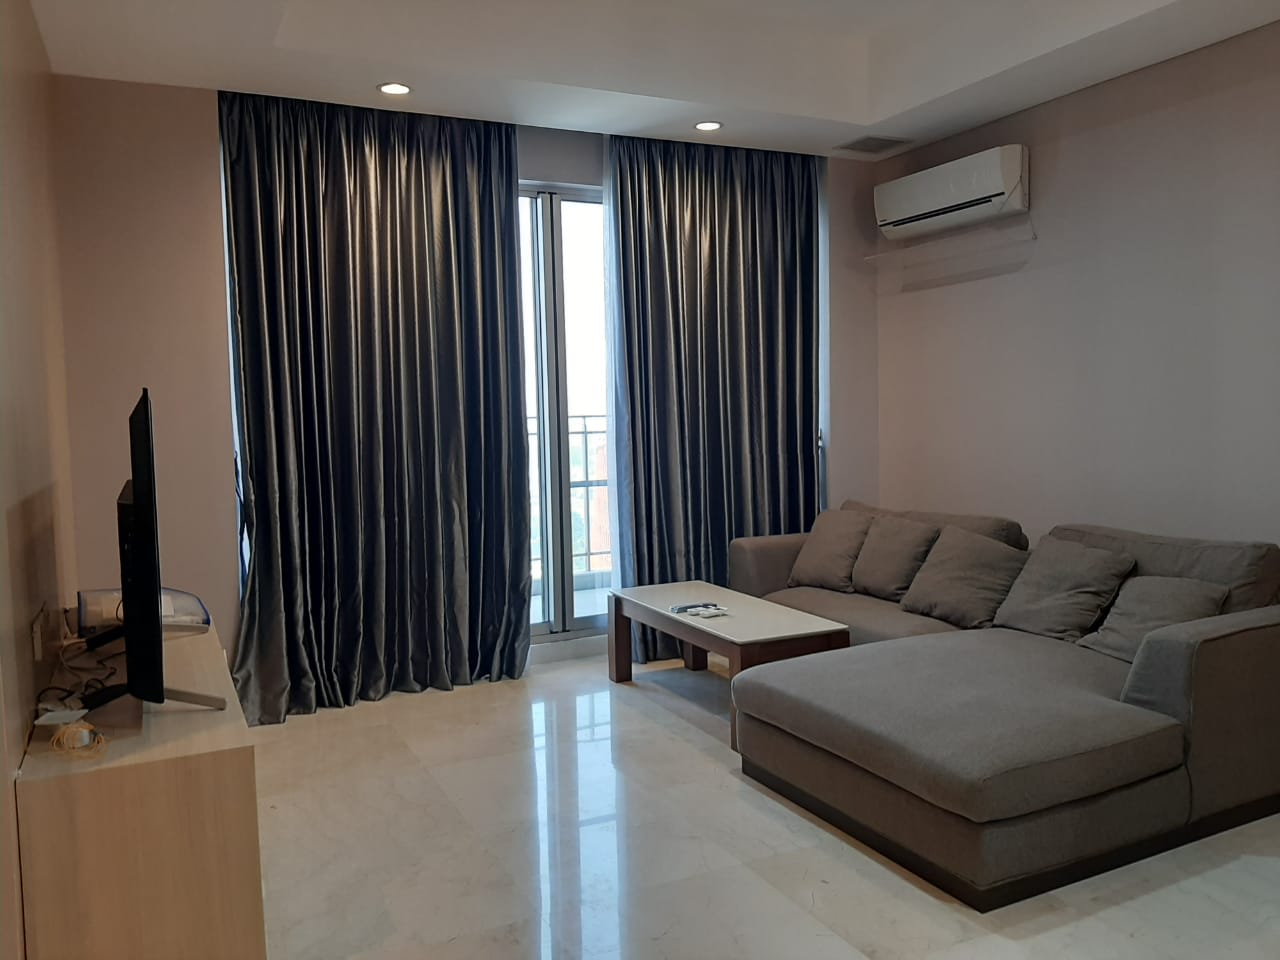 For Rent Pet Friendly Apartment in South Jakarta 2 bedrooms